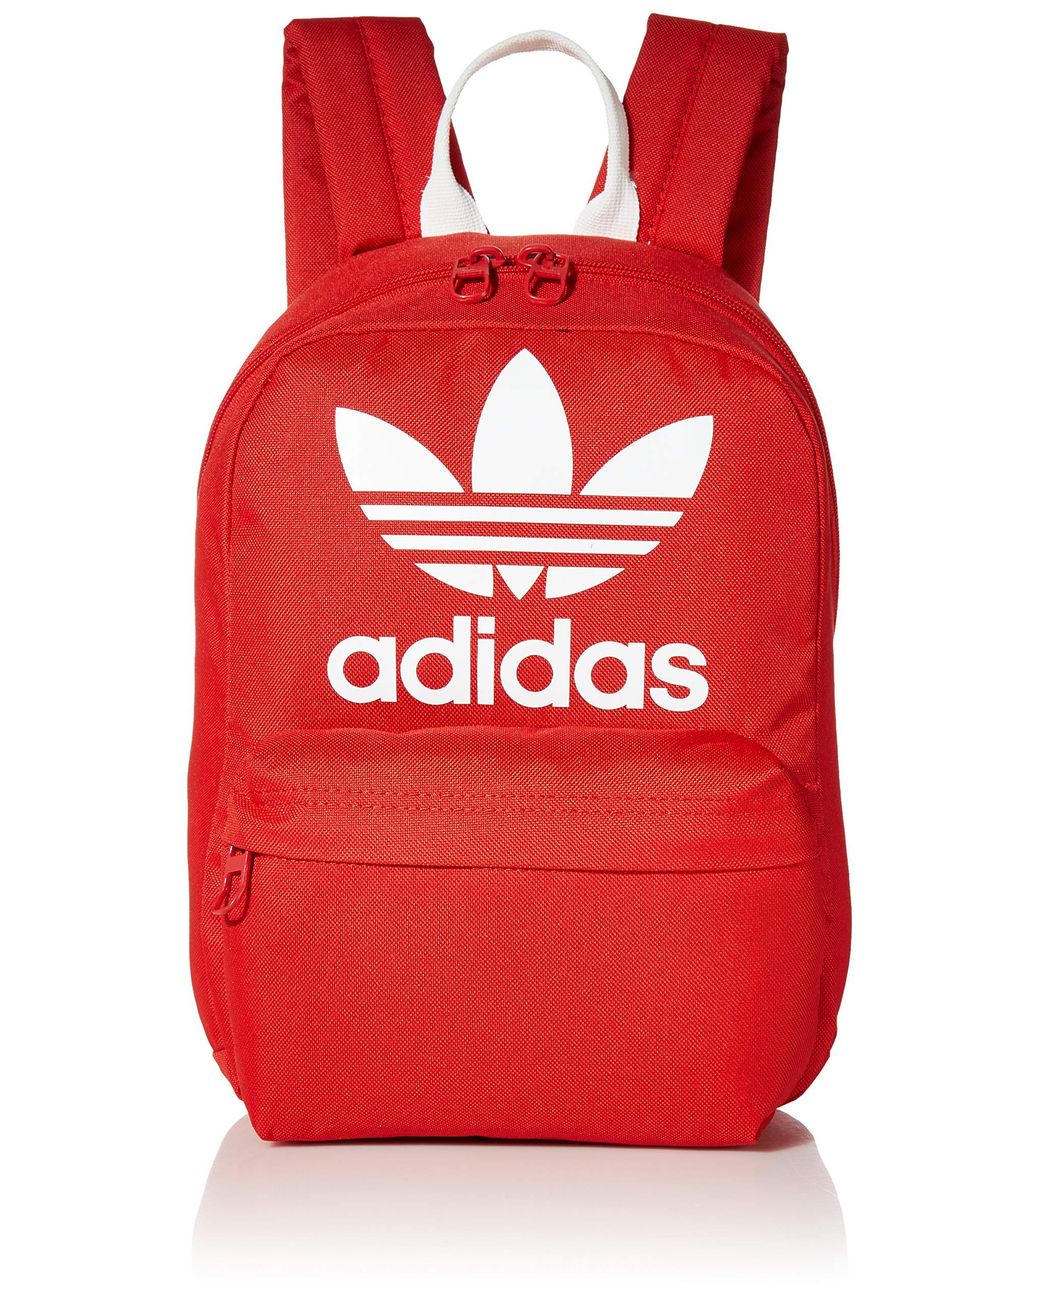 adidas Originals Small National Mini Backpack in Red | Lyst